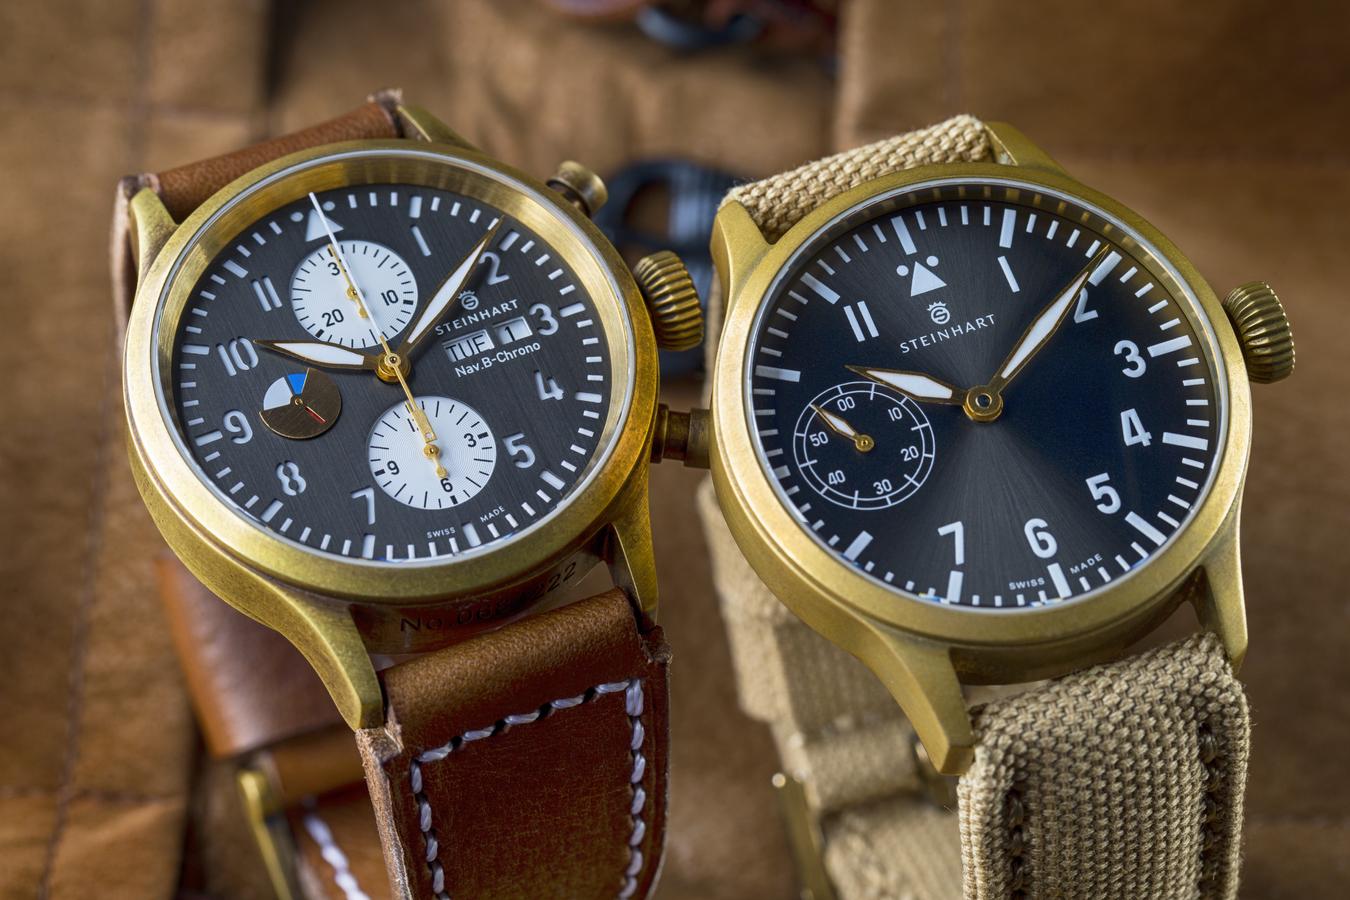 The Pilot Watch: From A Friendly Request To A Soaring Success